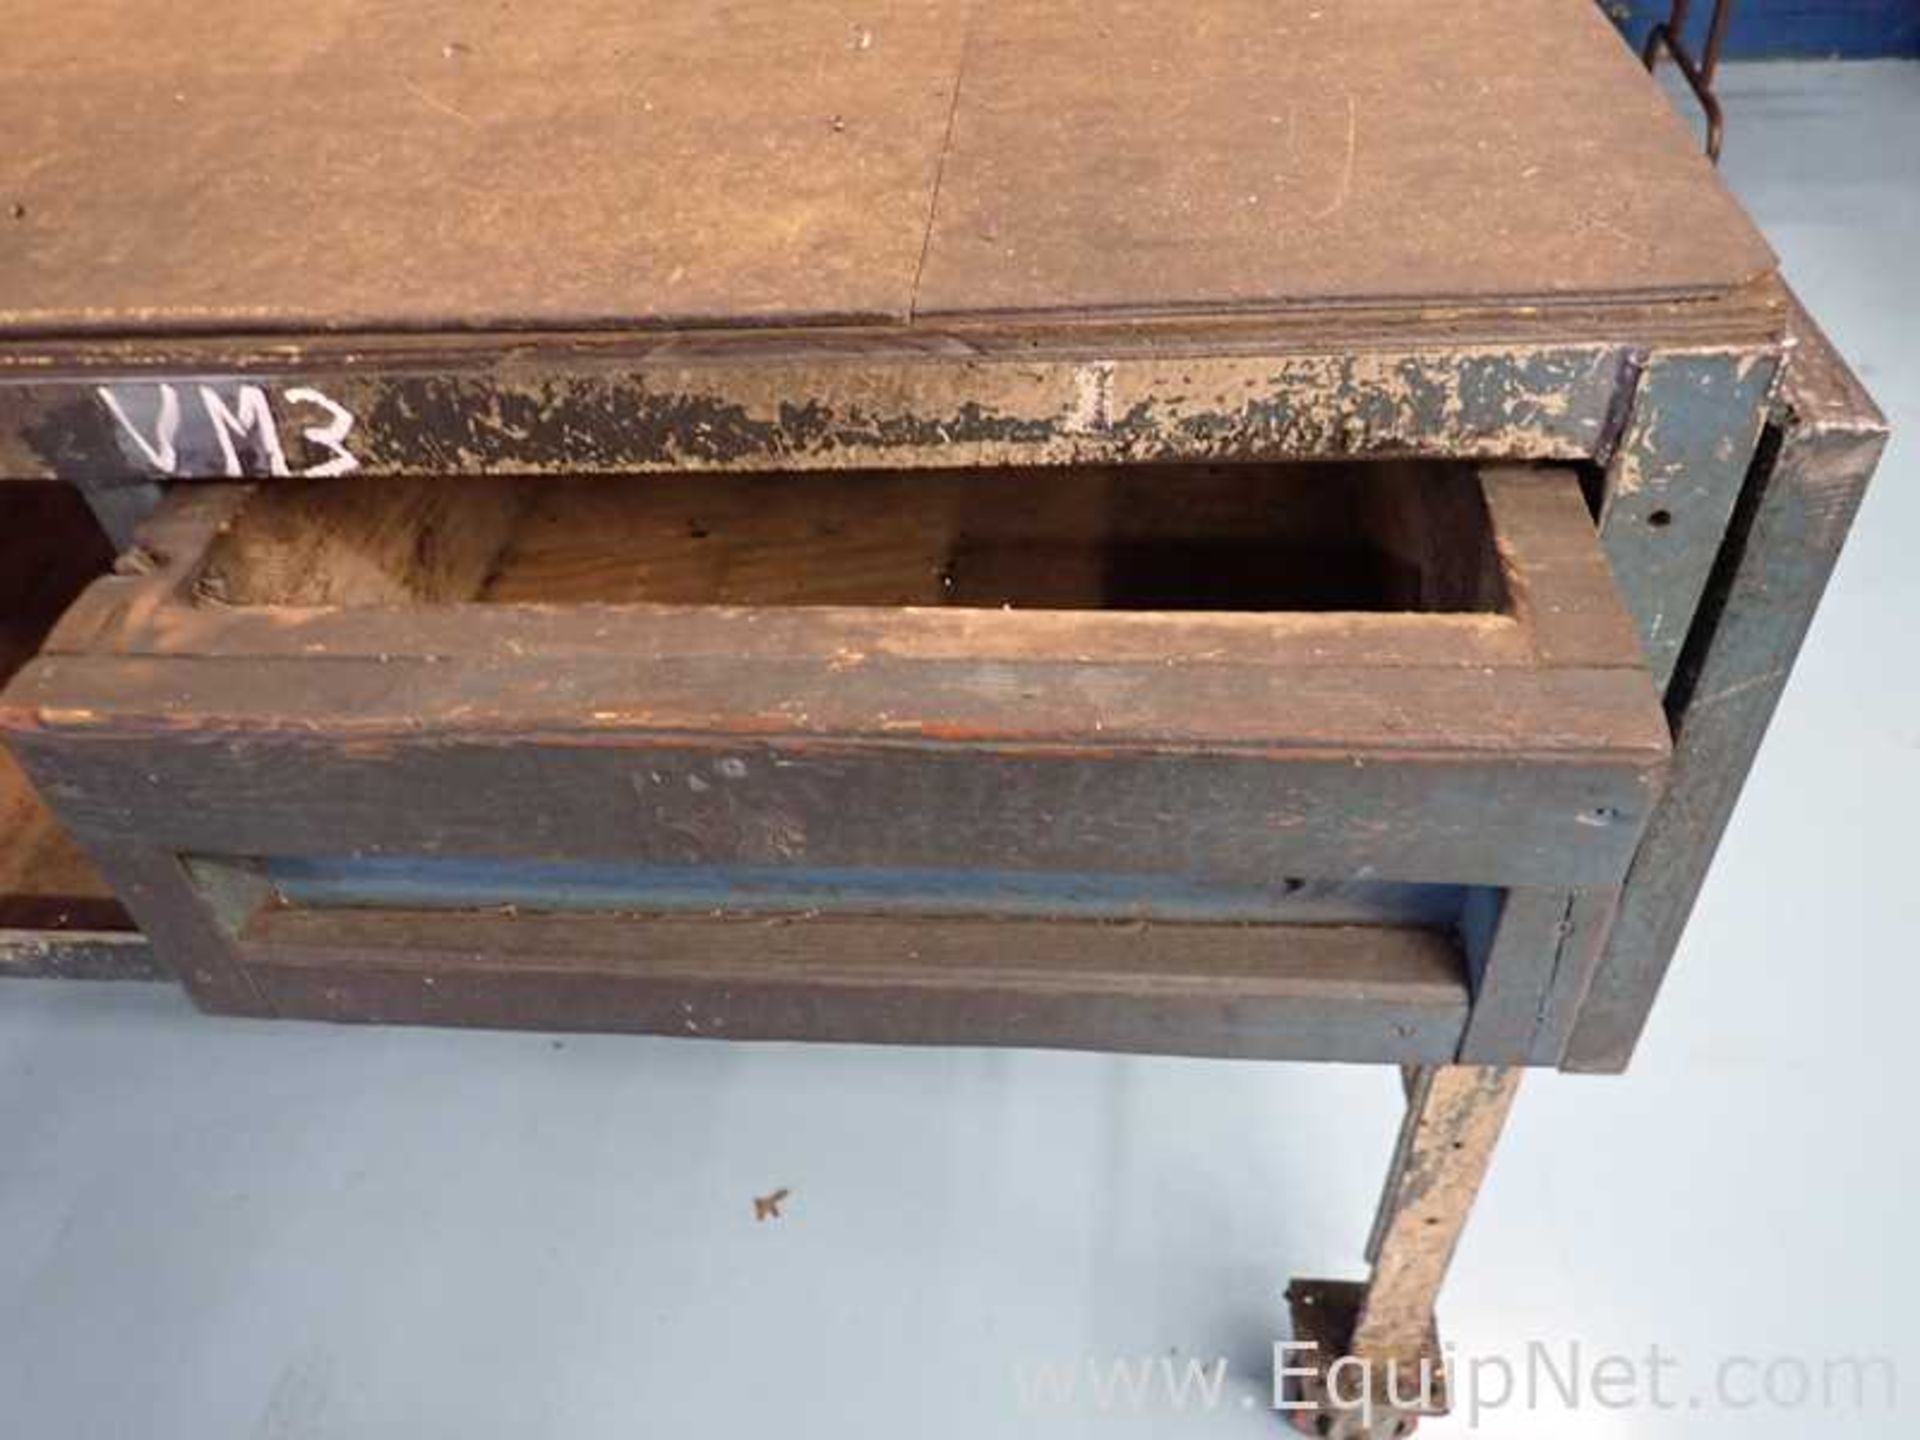 Lot of 2 Machine Shop Work Benches - Image 2 of 6